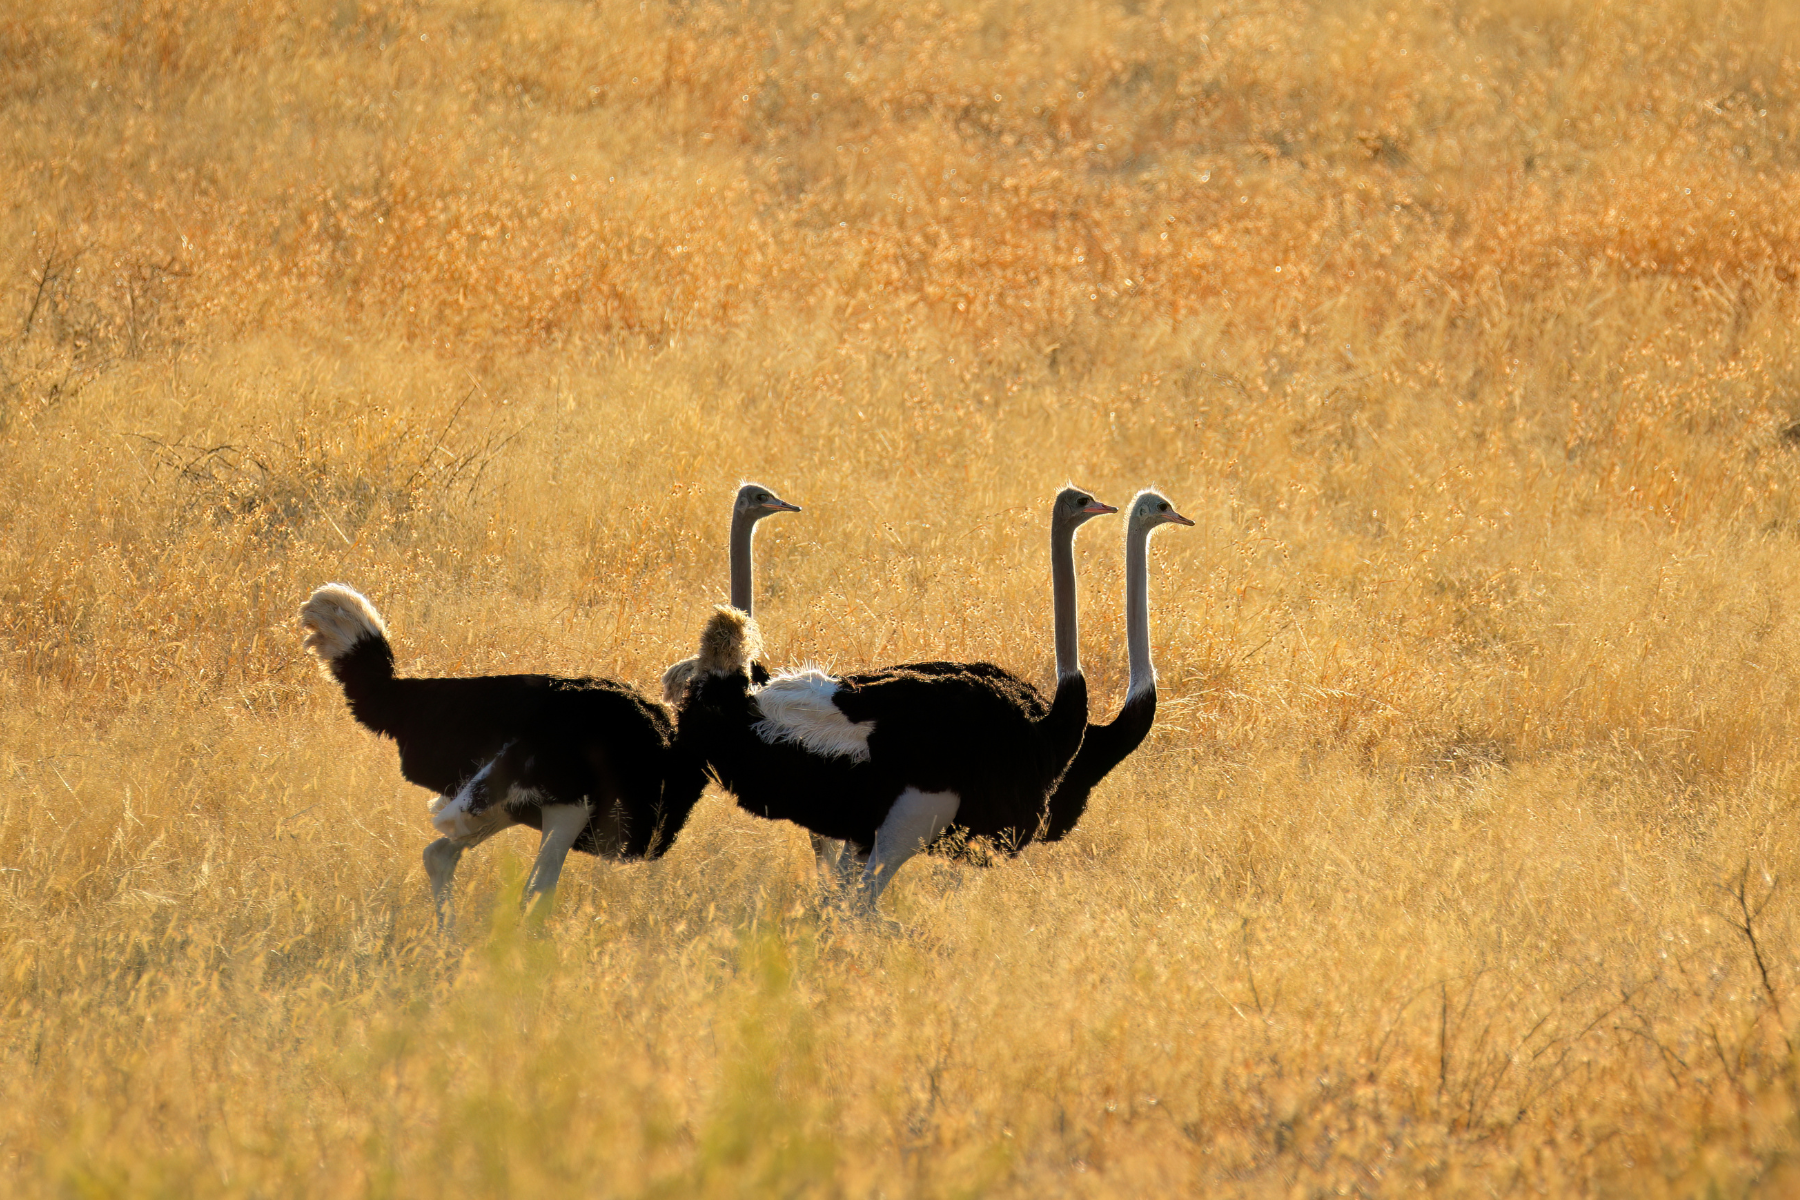 Ostriches Could Be The Answer For Water Conservation During Droughts